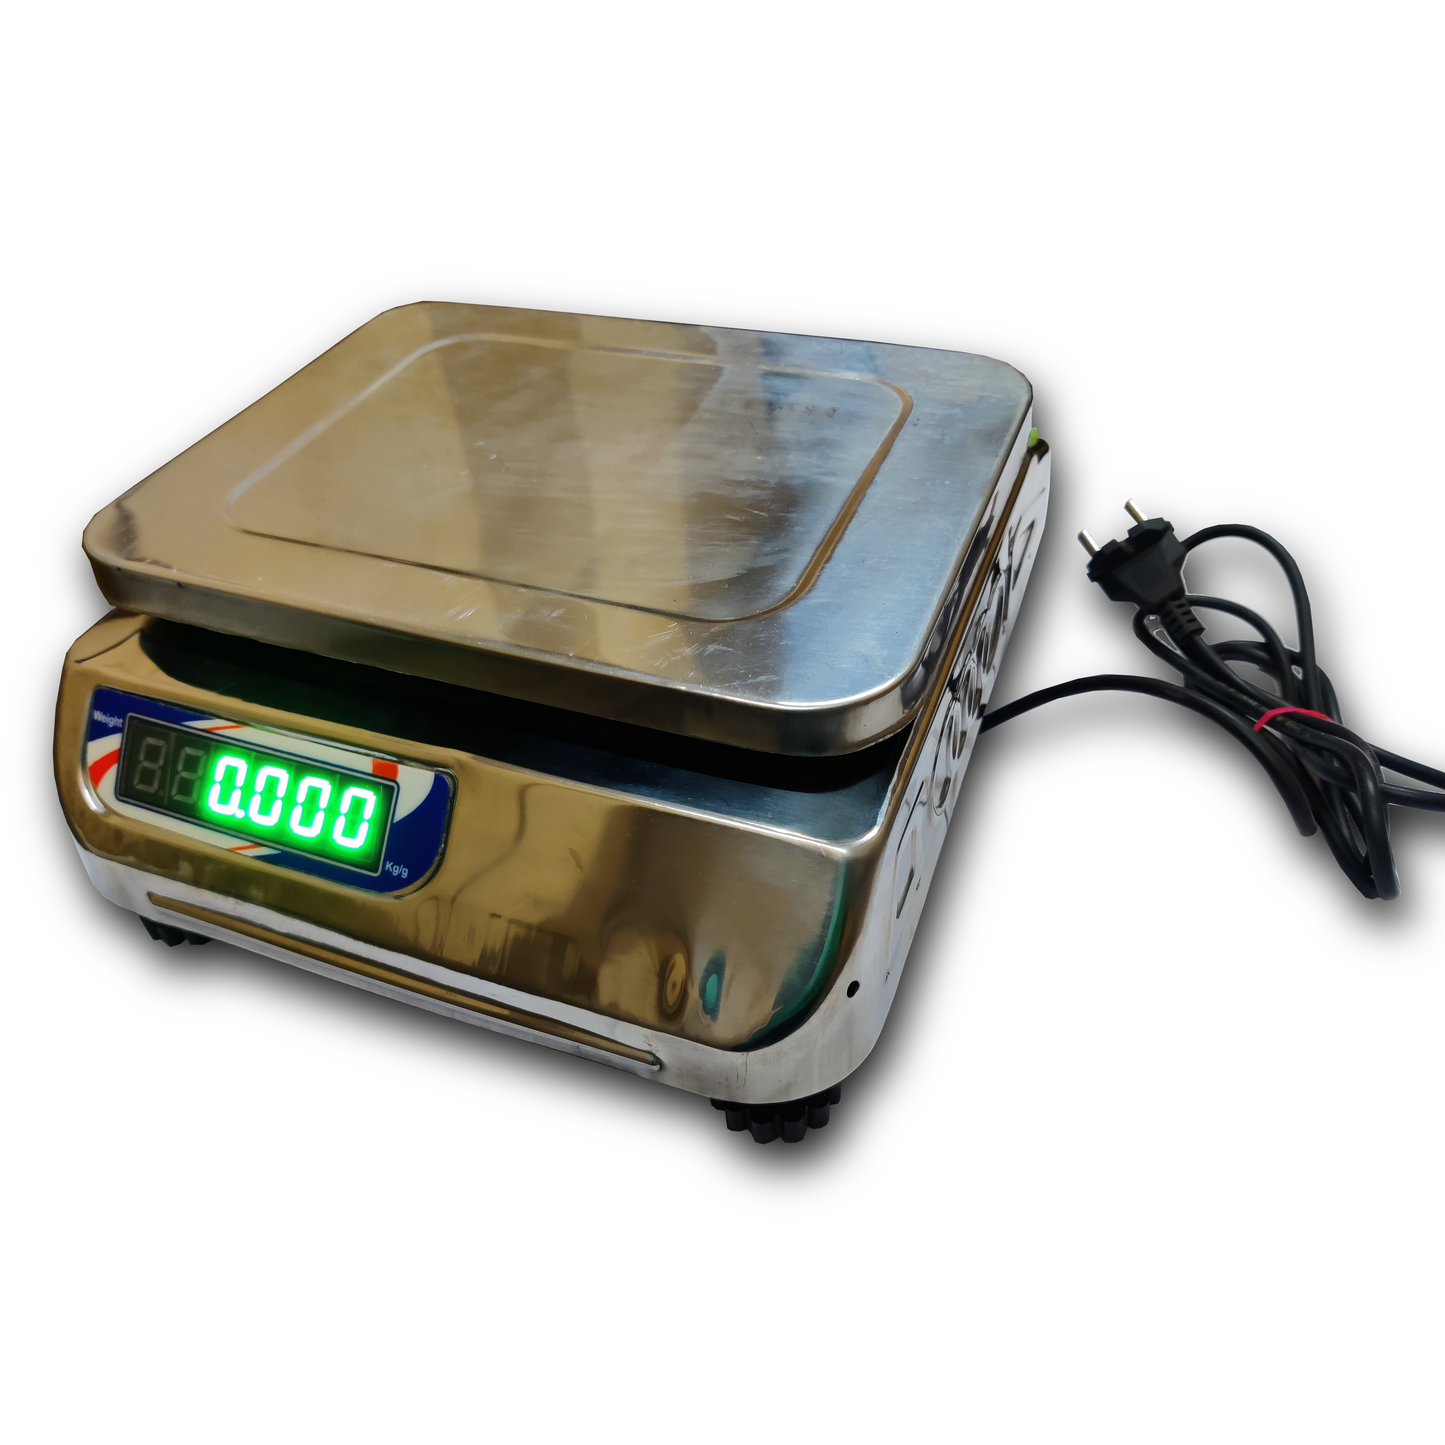 Aranze 30kg x 2 g Digital Table Top Weighing Scale with Front and Back Display Pan for Retail Shops, Kitchen and Commercial Purposes (9x7 inches, Stainless Steel)